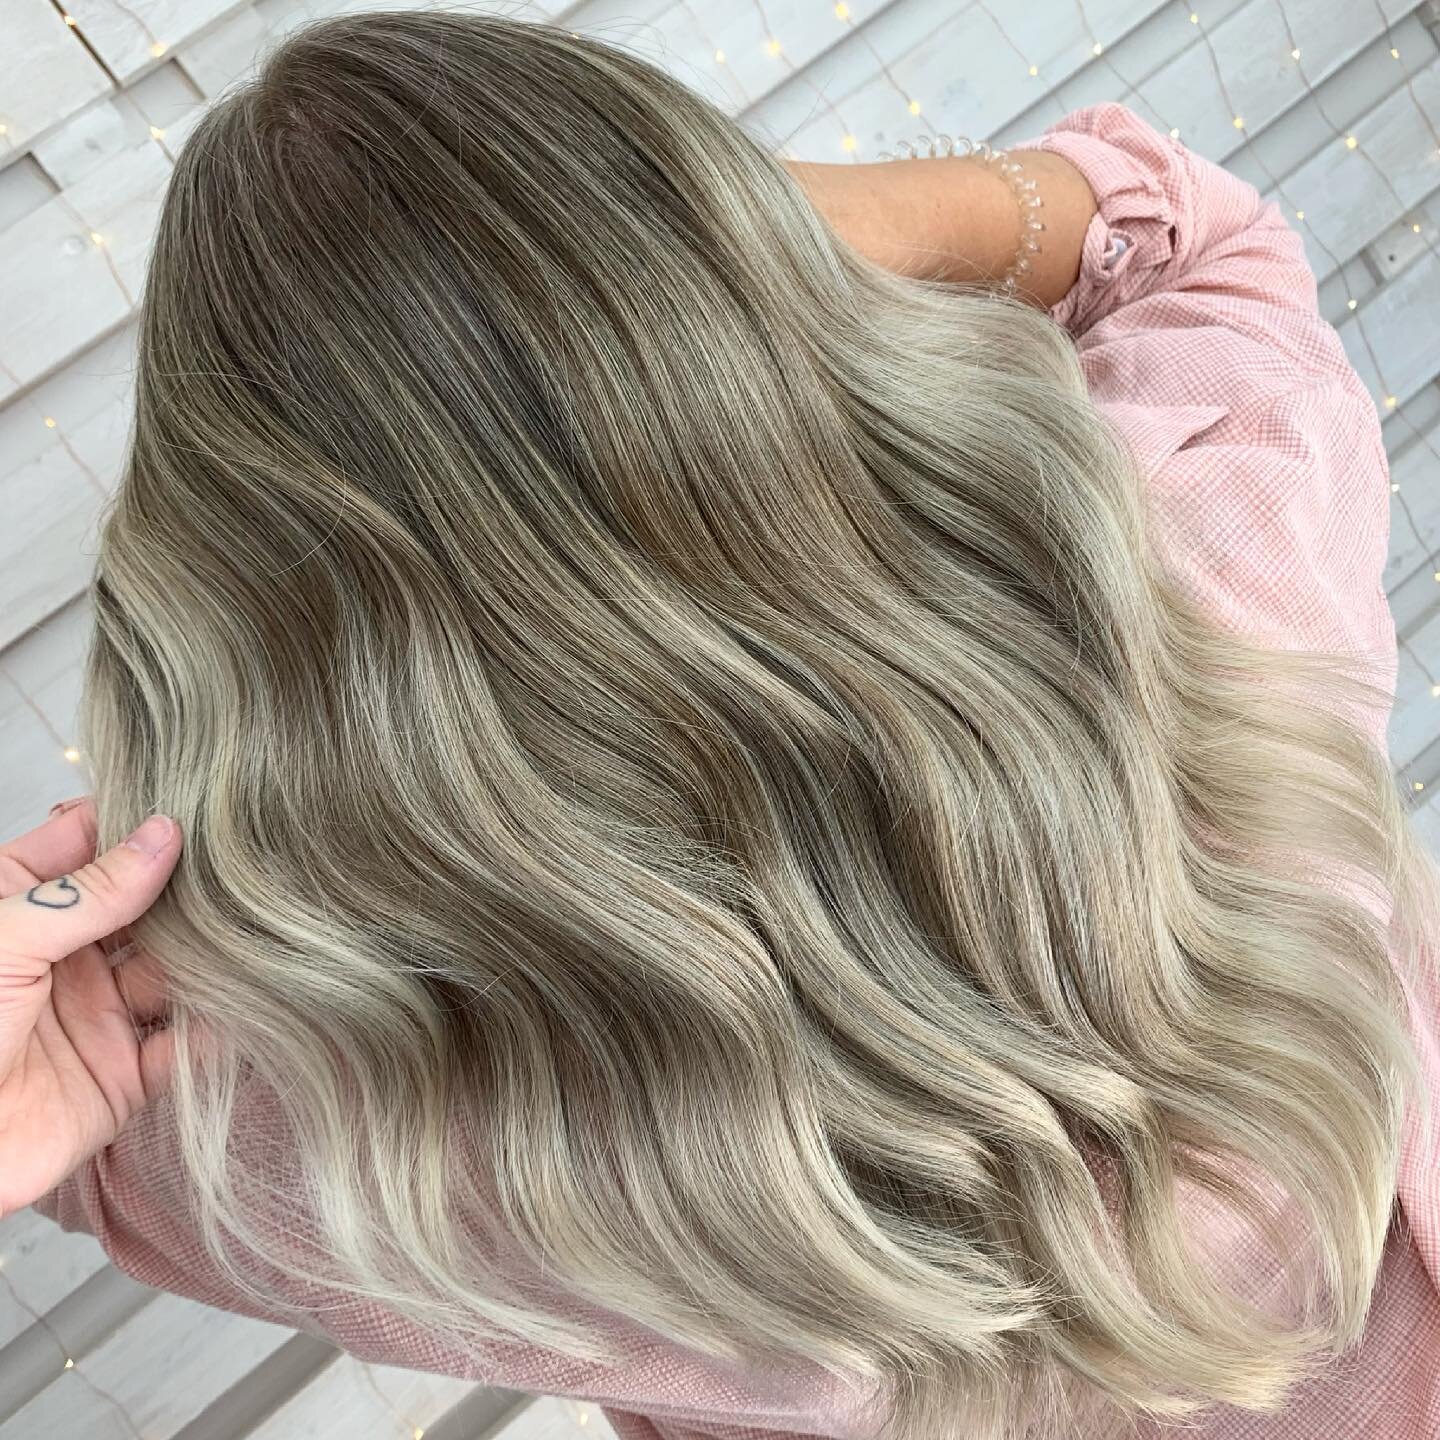 Lived in melty blondes are my by far my favourite hair colours. 
Ribbons of air touch balayage pieces and subtle baby lights are the perfect combo for a beachy coconut blonde 🥥